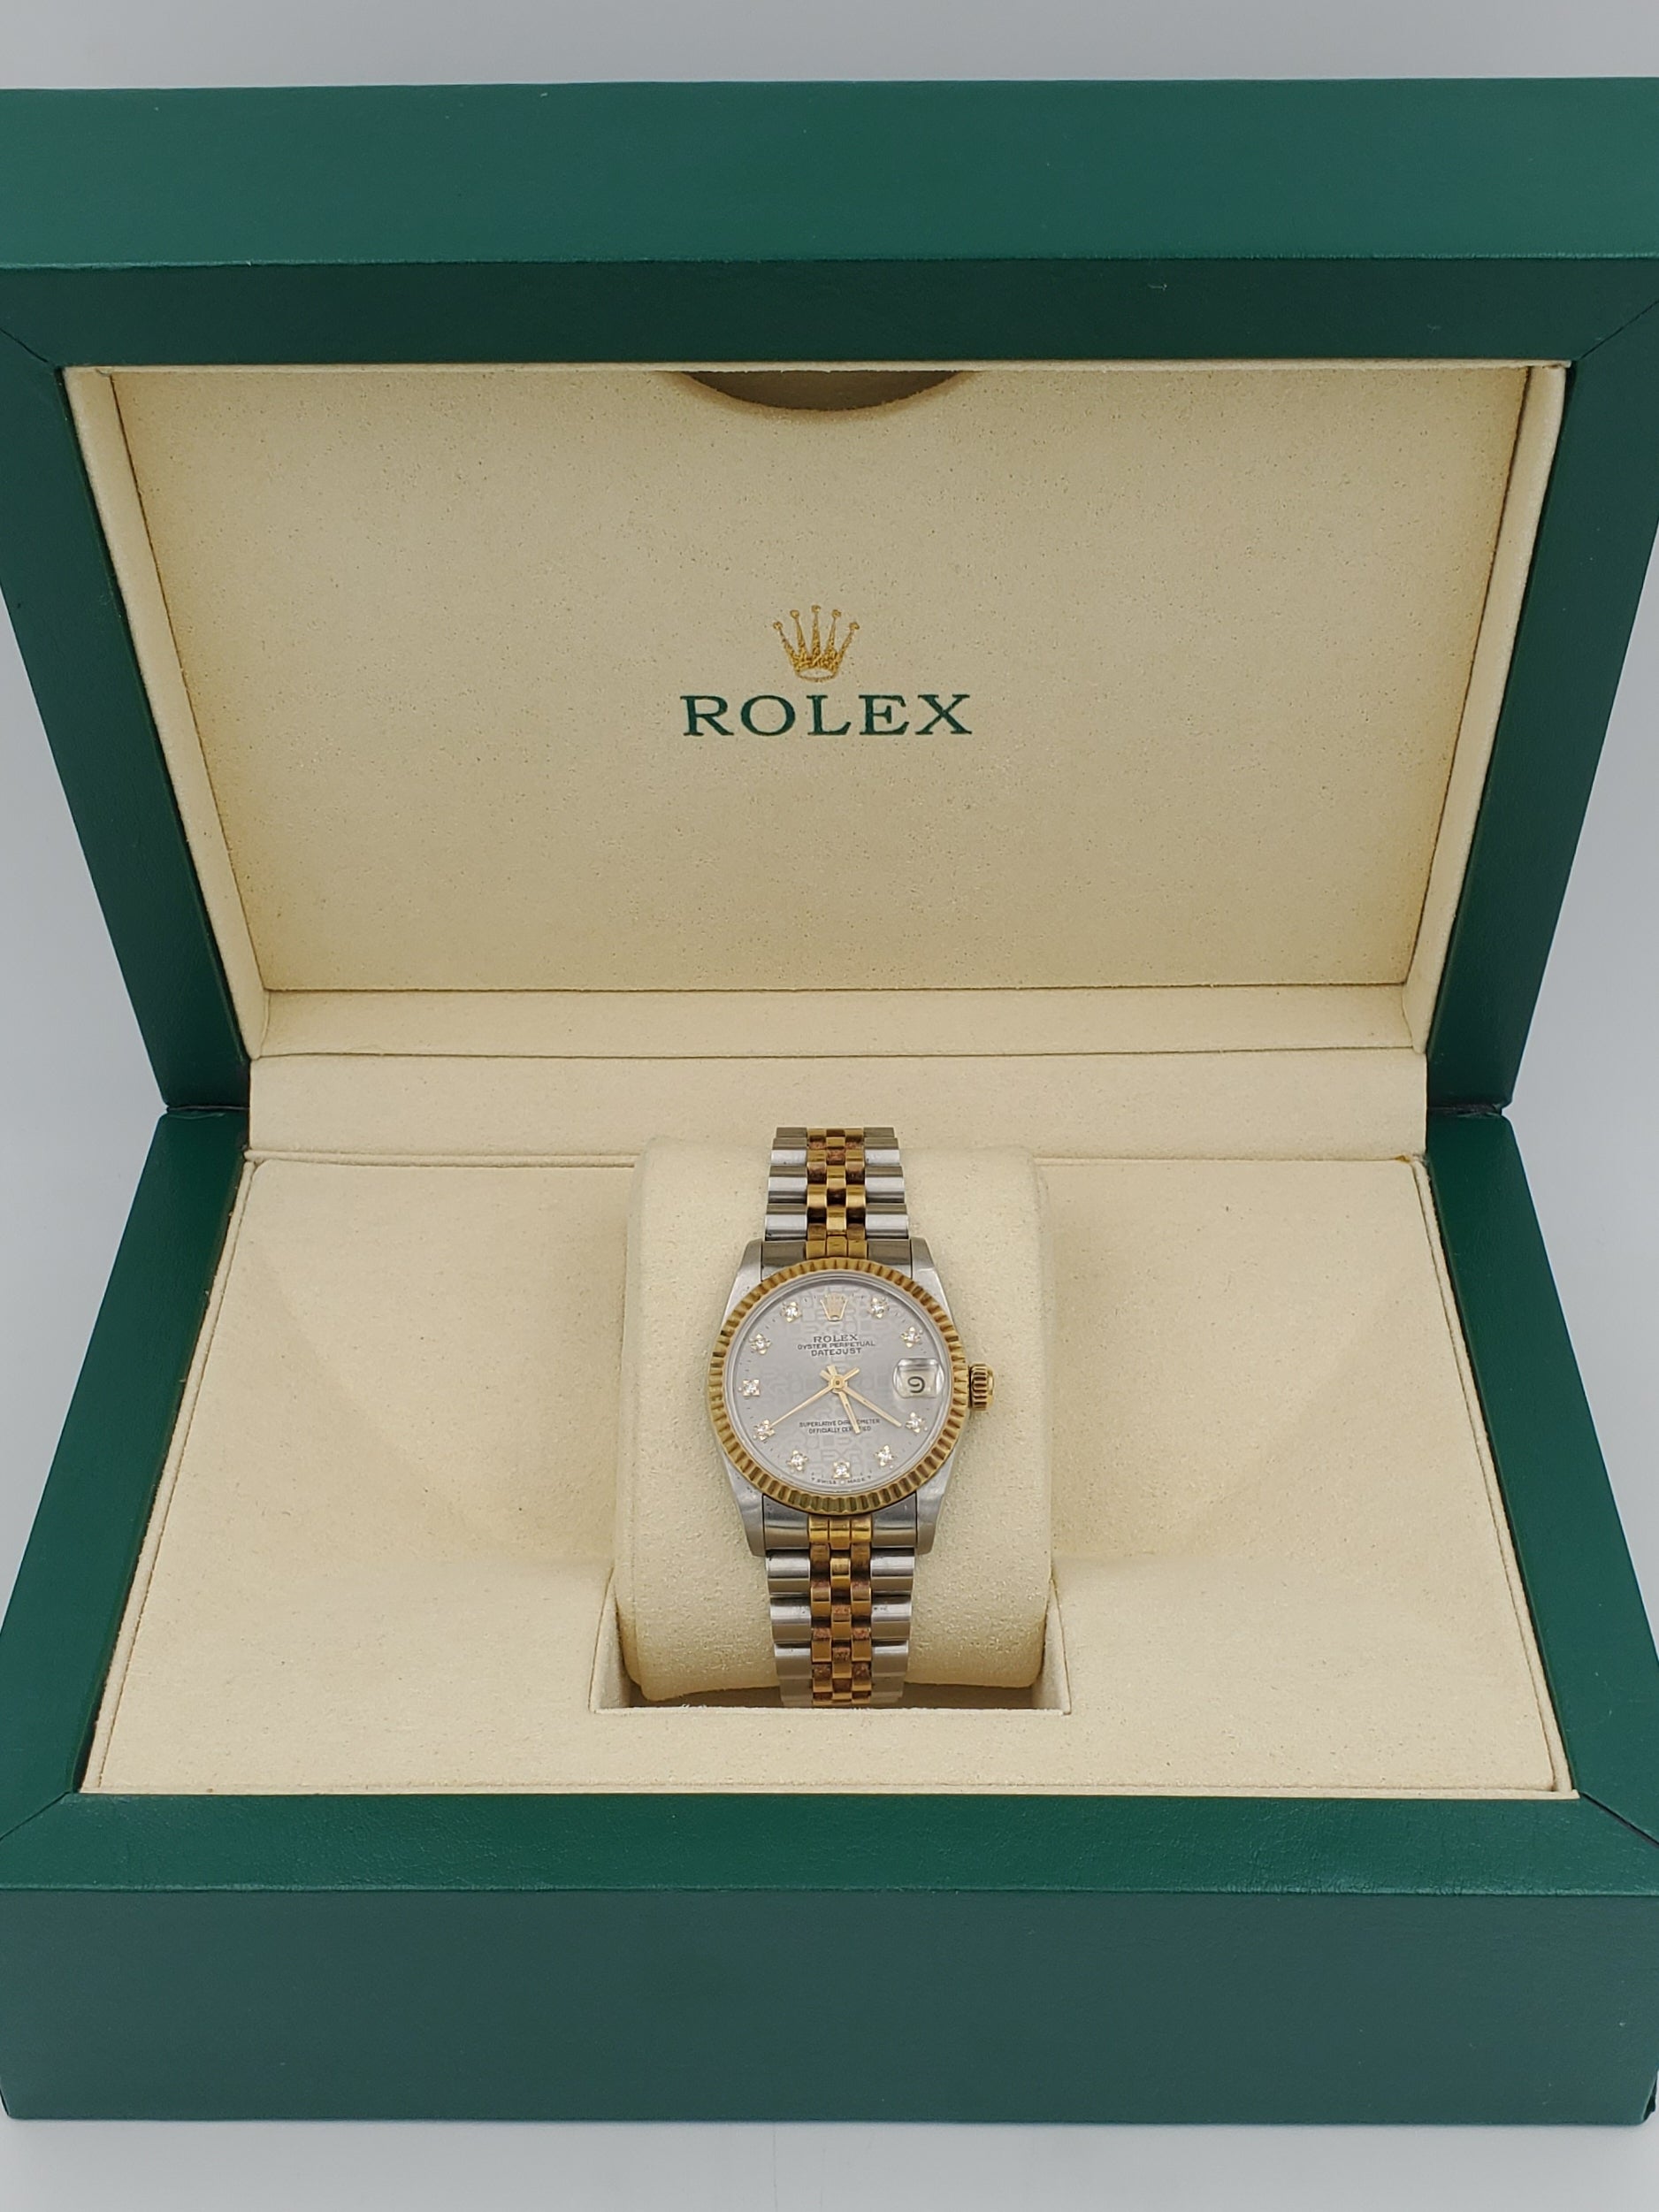 Ladies Rolex Midsize 31mm DateJust Two Tone 18K Yellow Gold / Stainless Steel Watch with Silver Diamond Dial and Fluted Bezel. (Pre-Owned 682735)